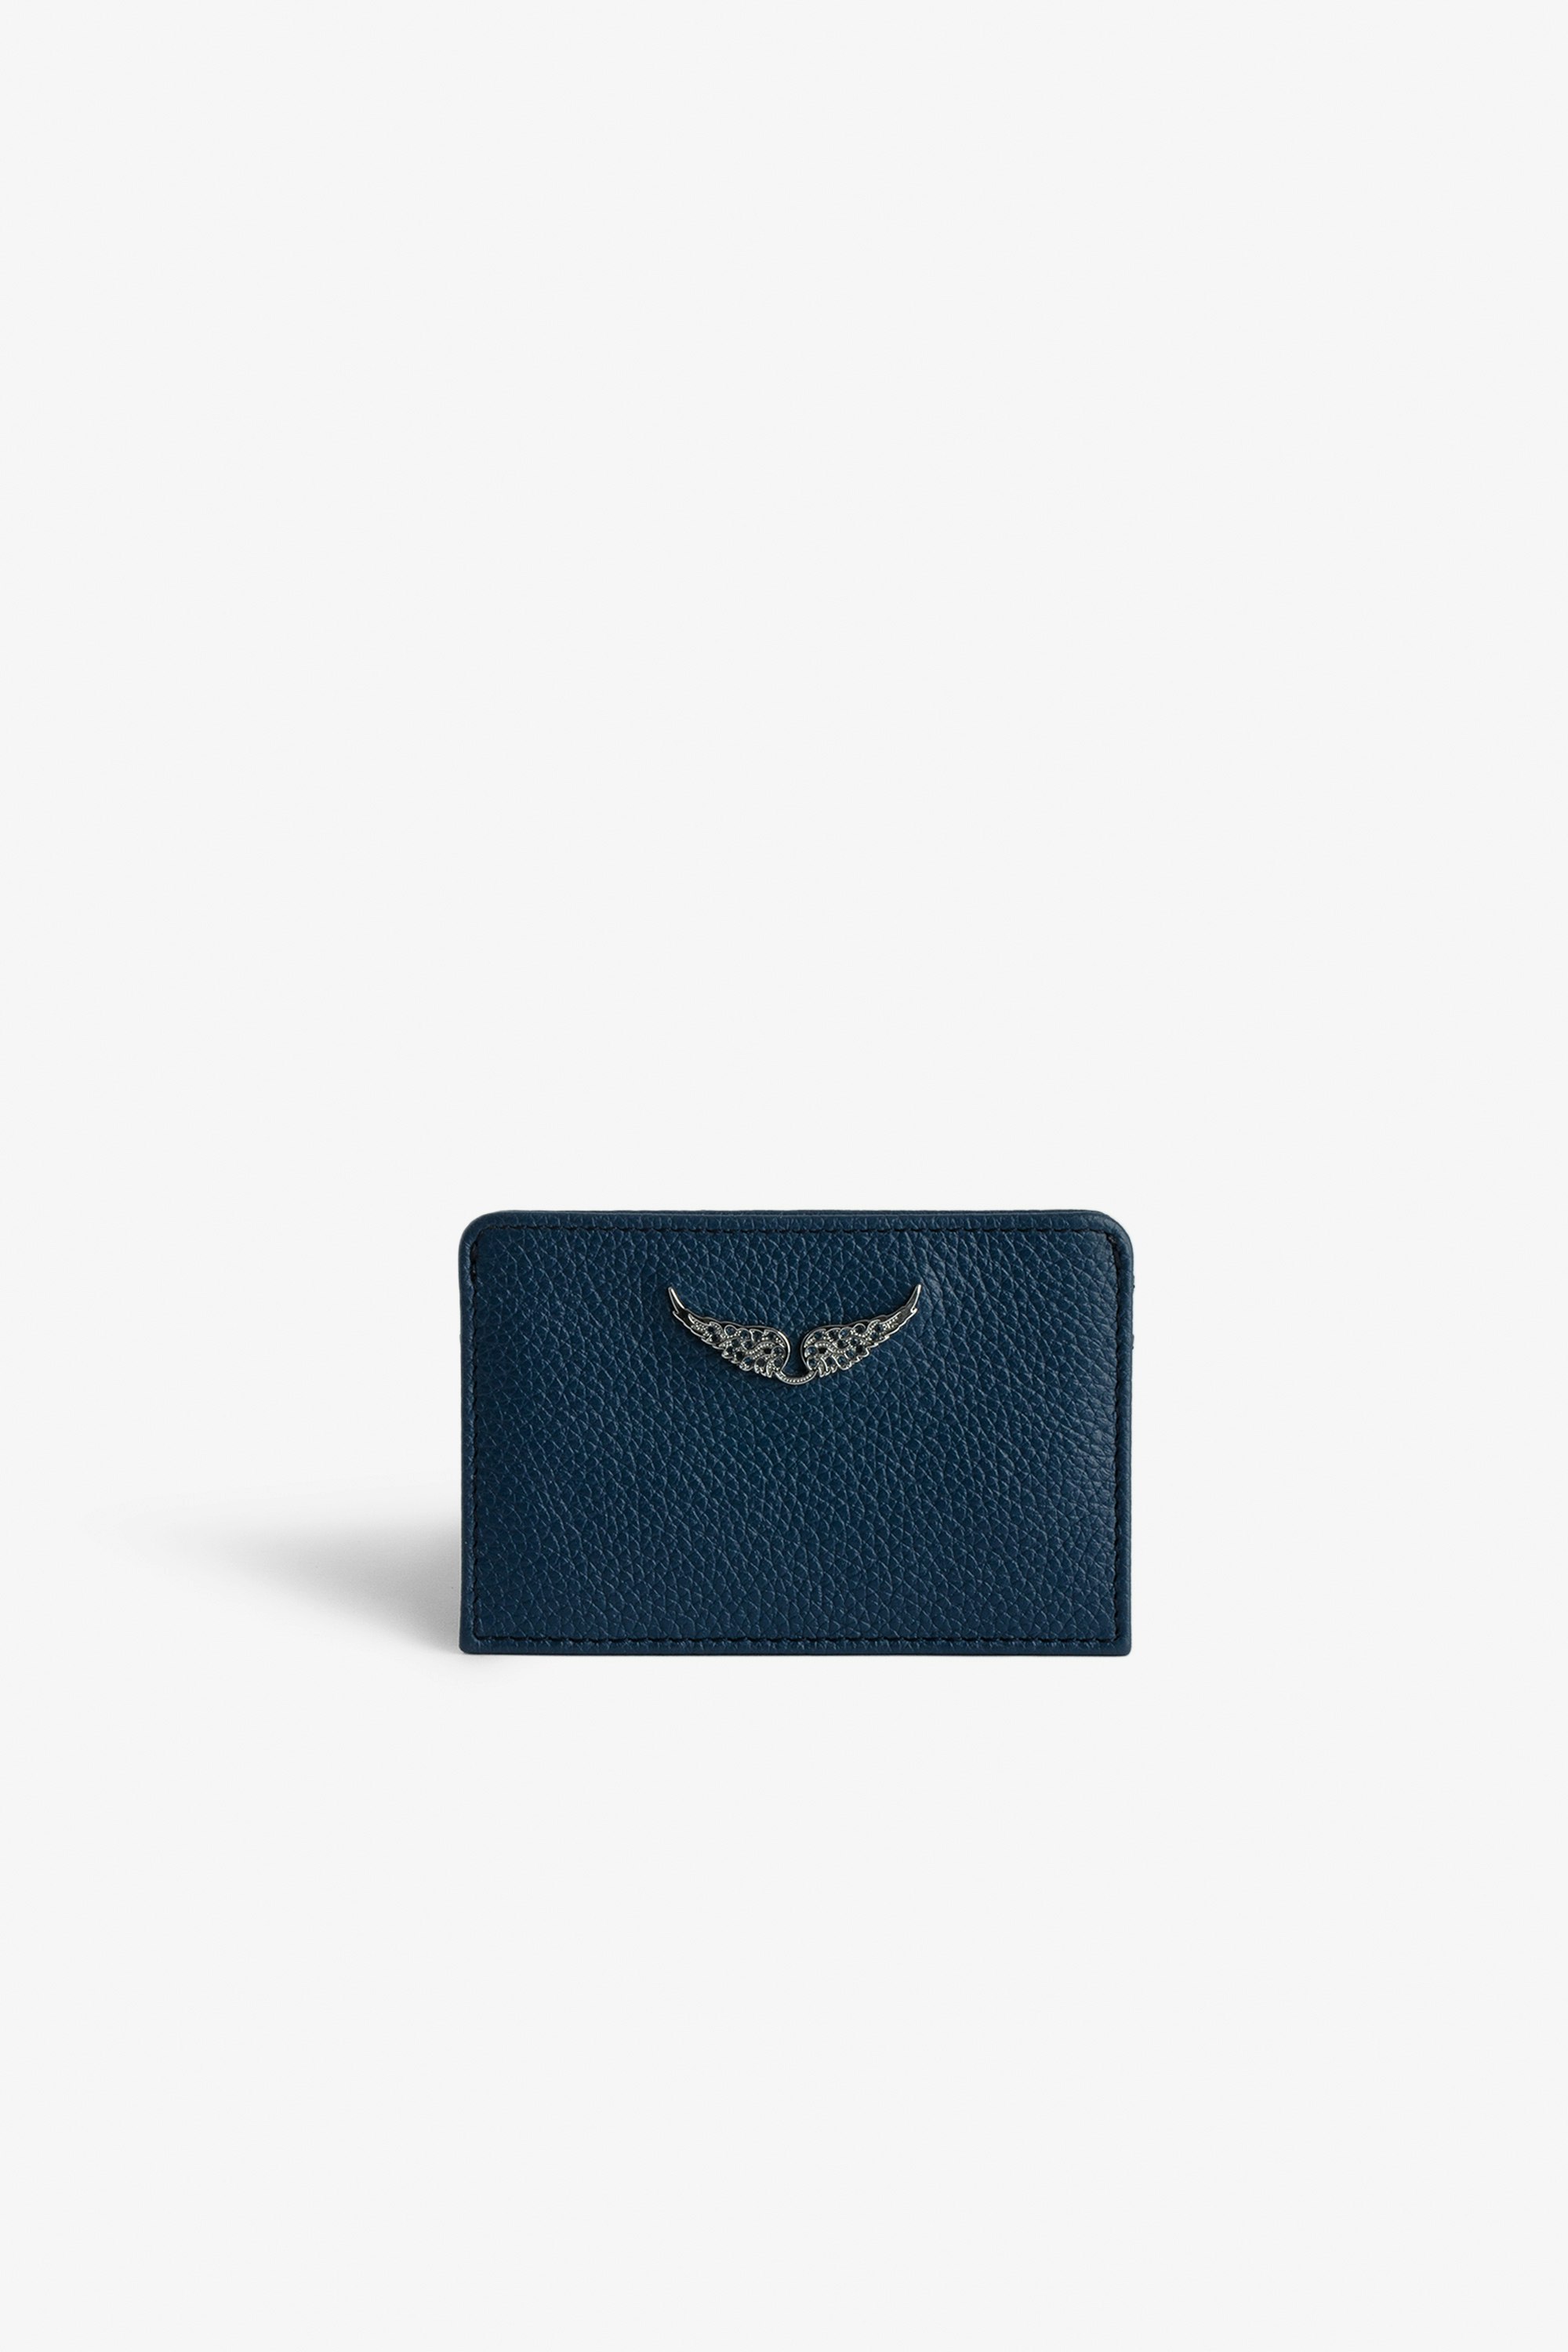 ZV Pass Card Holder - Navy blue grained leather card holder.